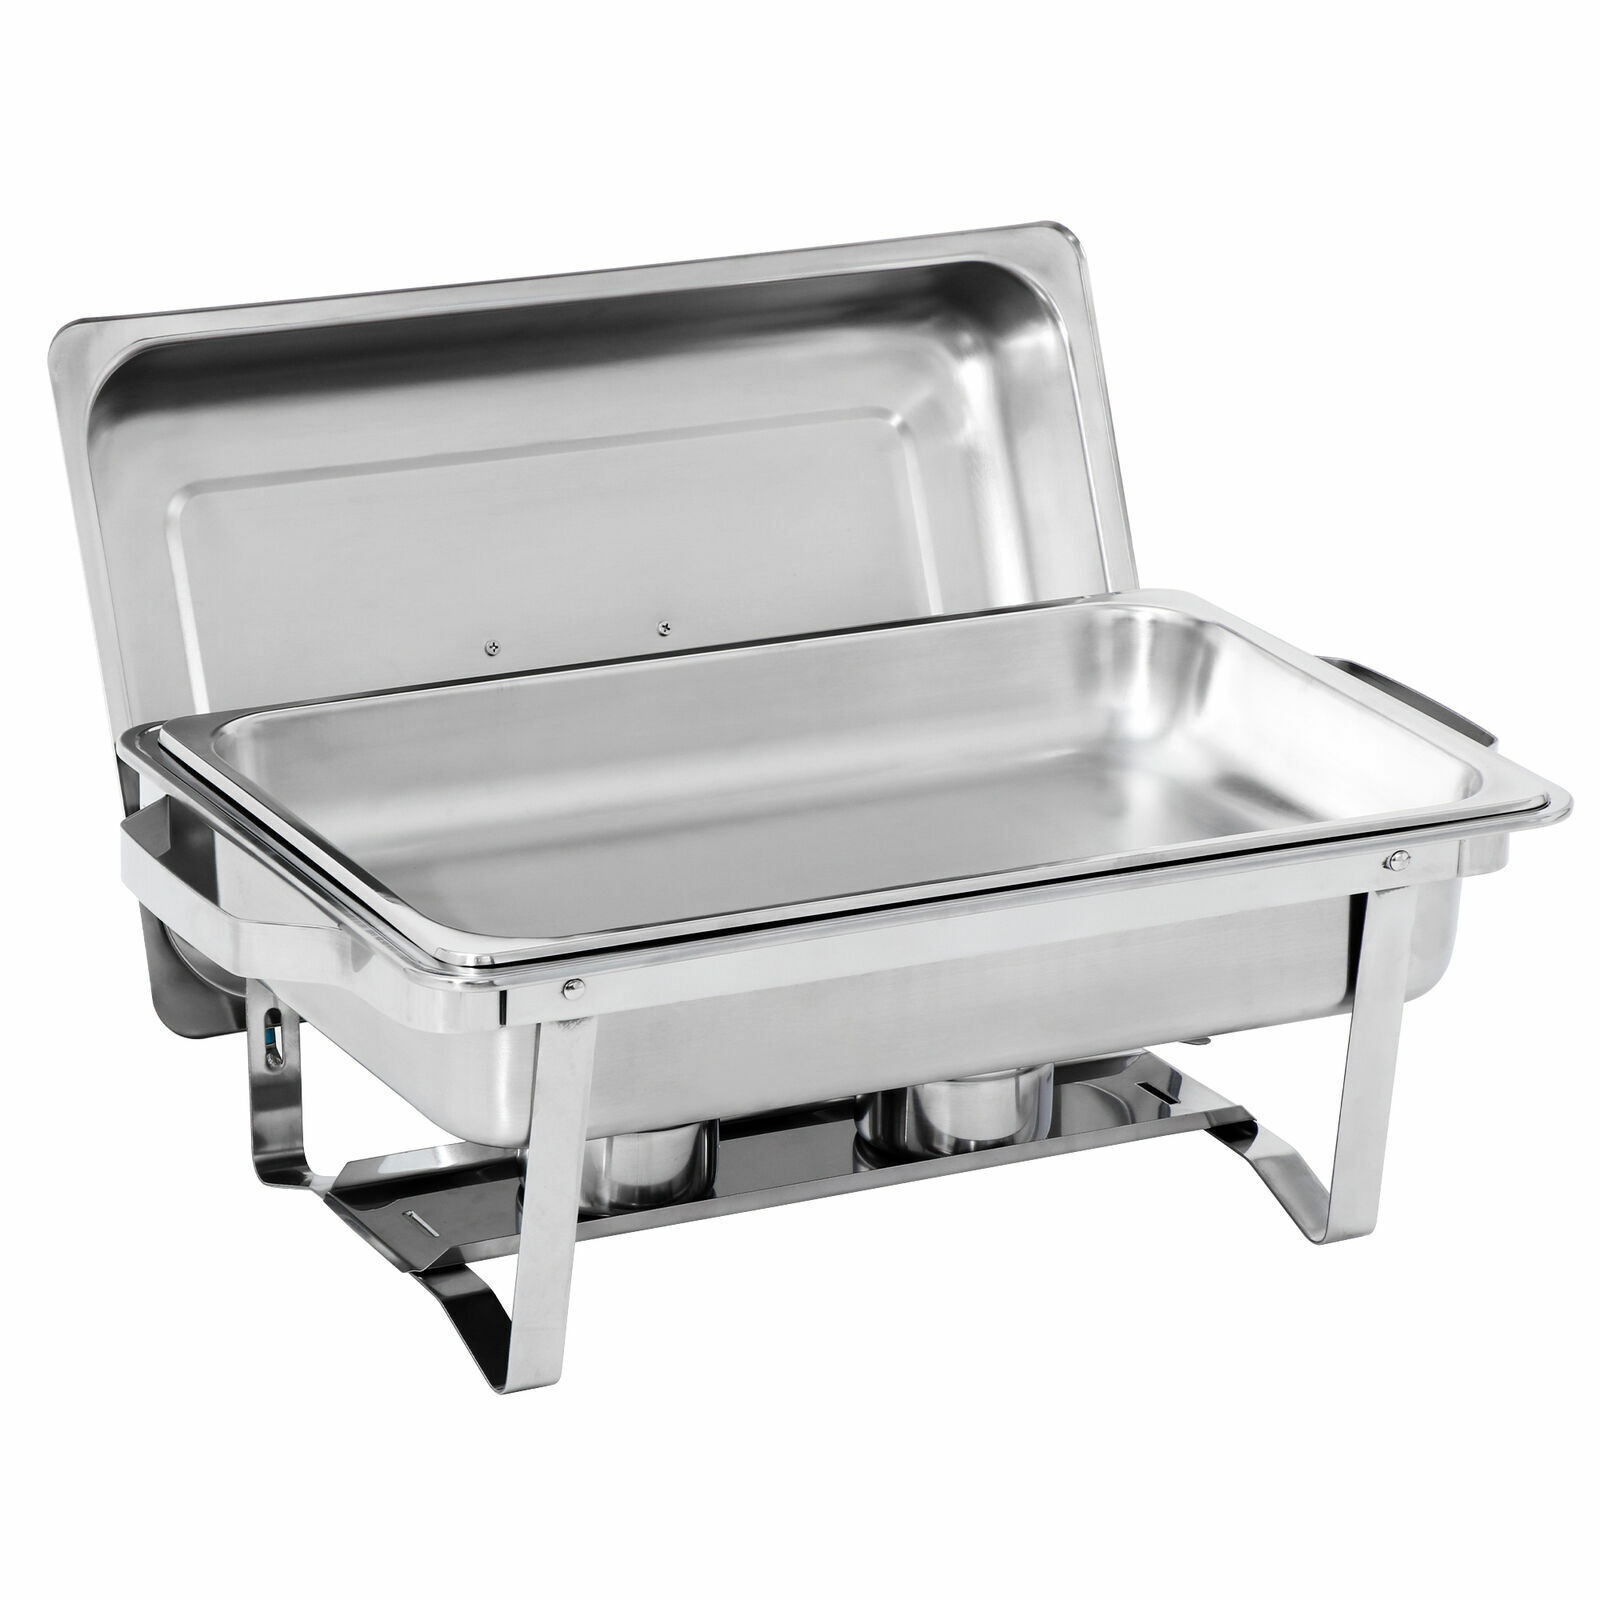 thinkstar 4 Pack 8 Qt Stainless Steel Chafer Chafing Dish Sets Catering Food Warmer